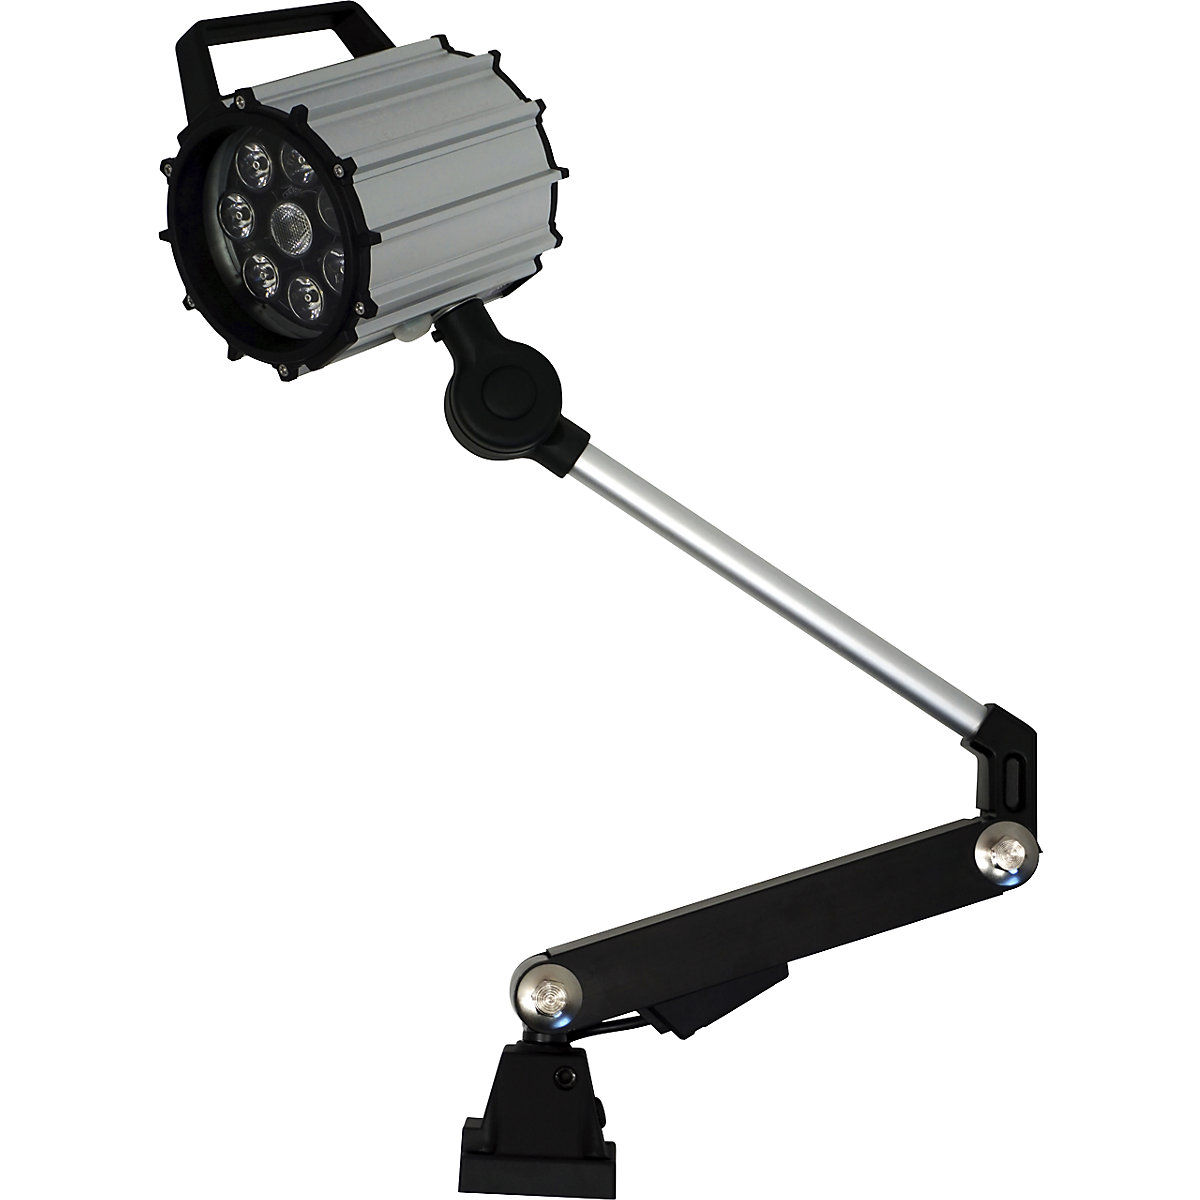 Workis 10 LED lamp with articulated arm